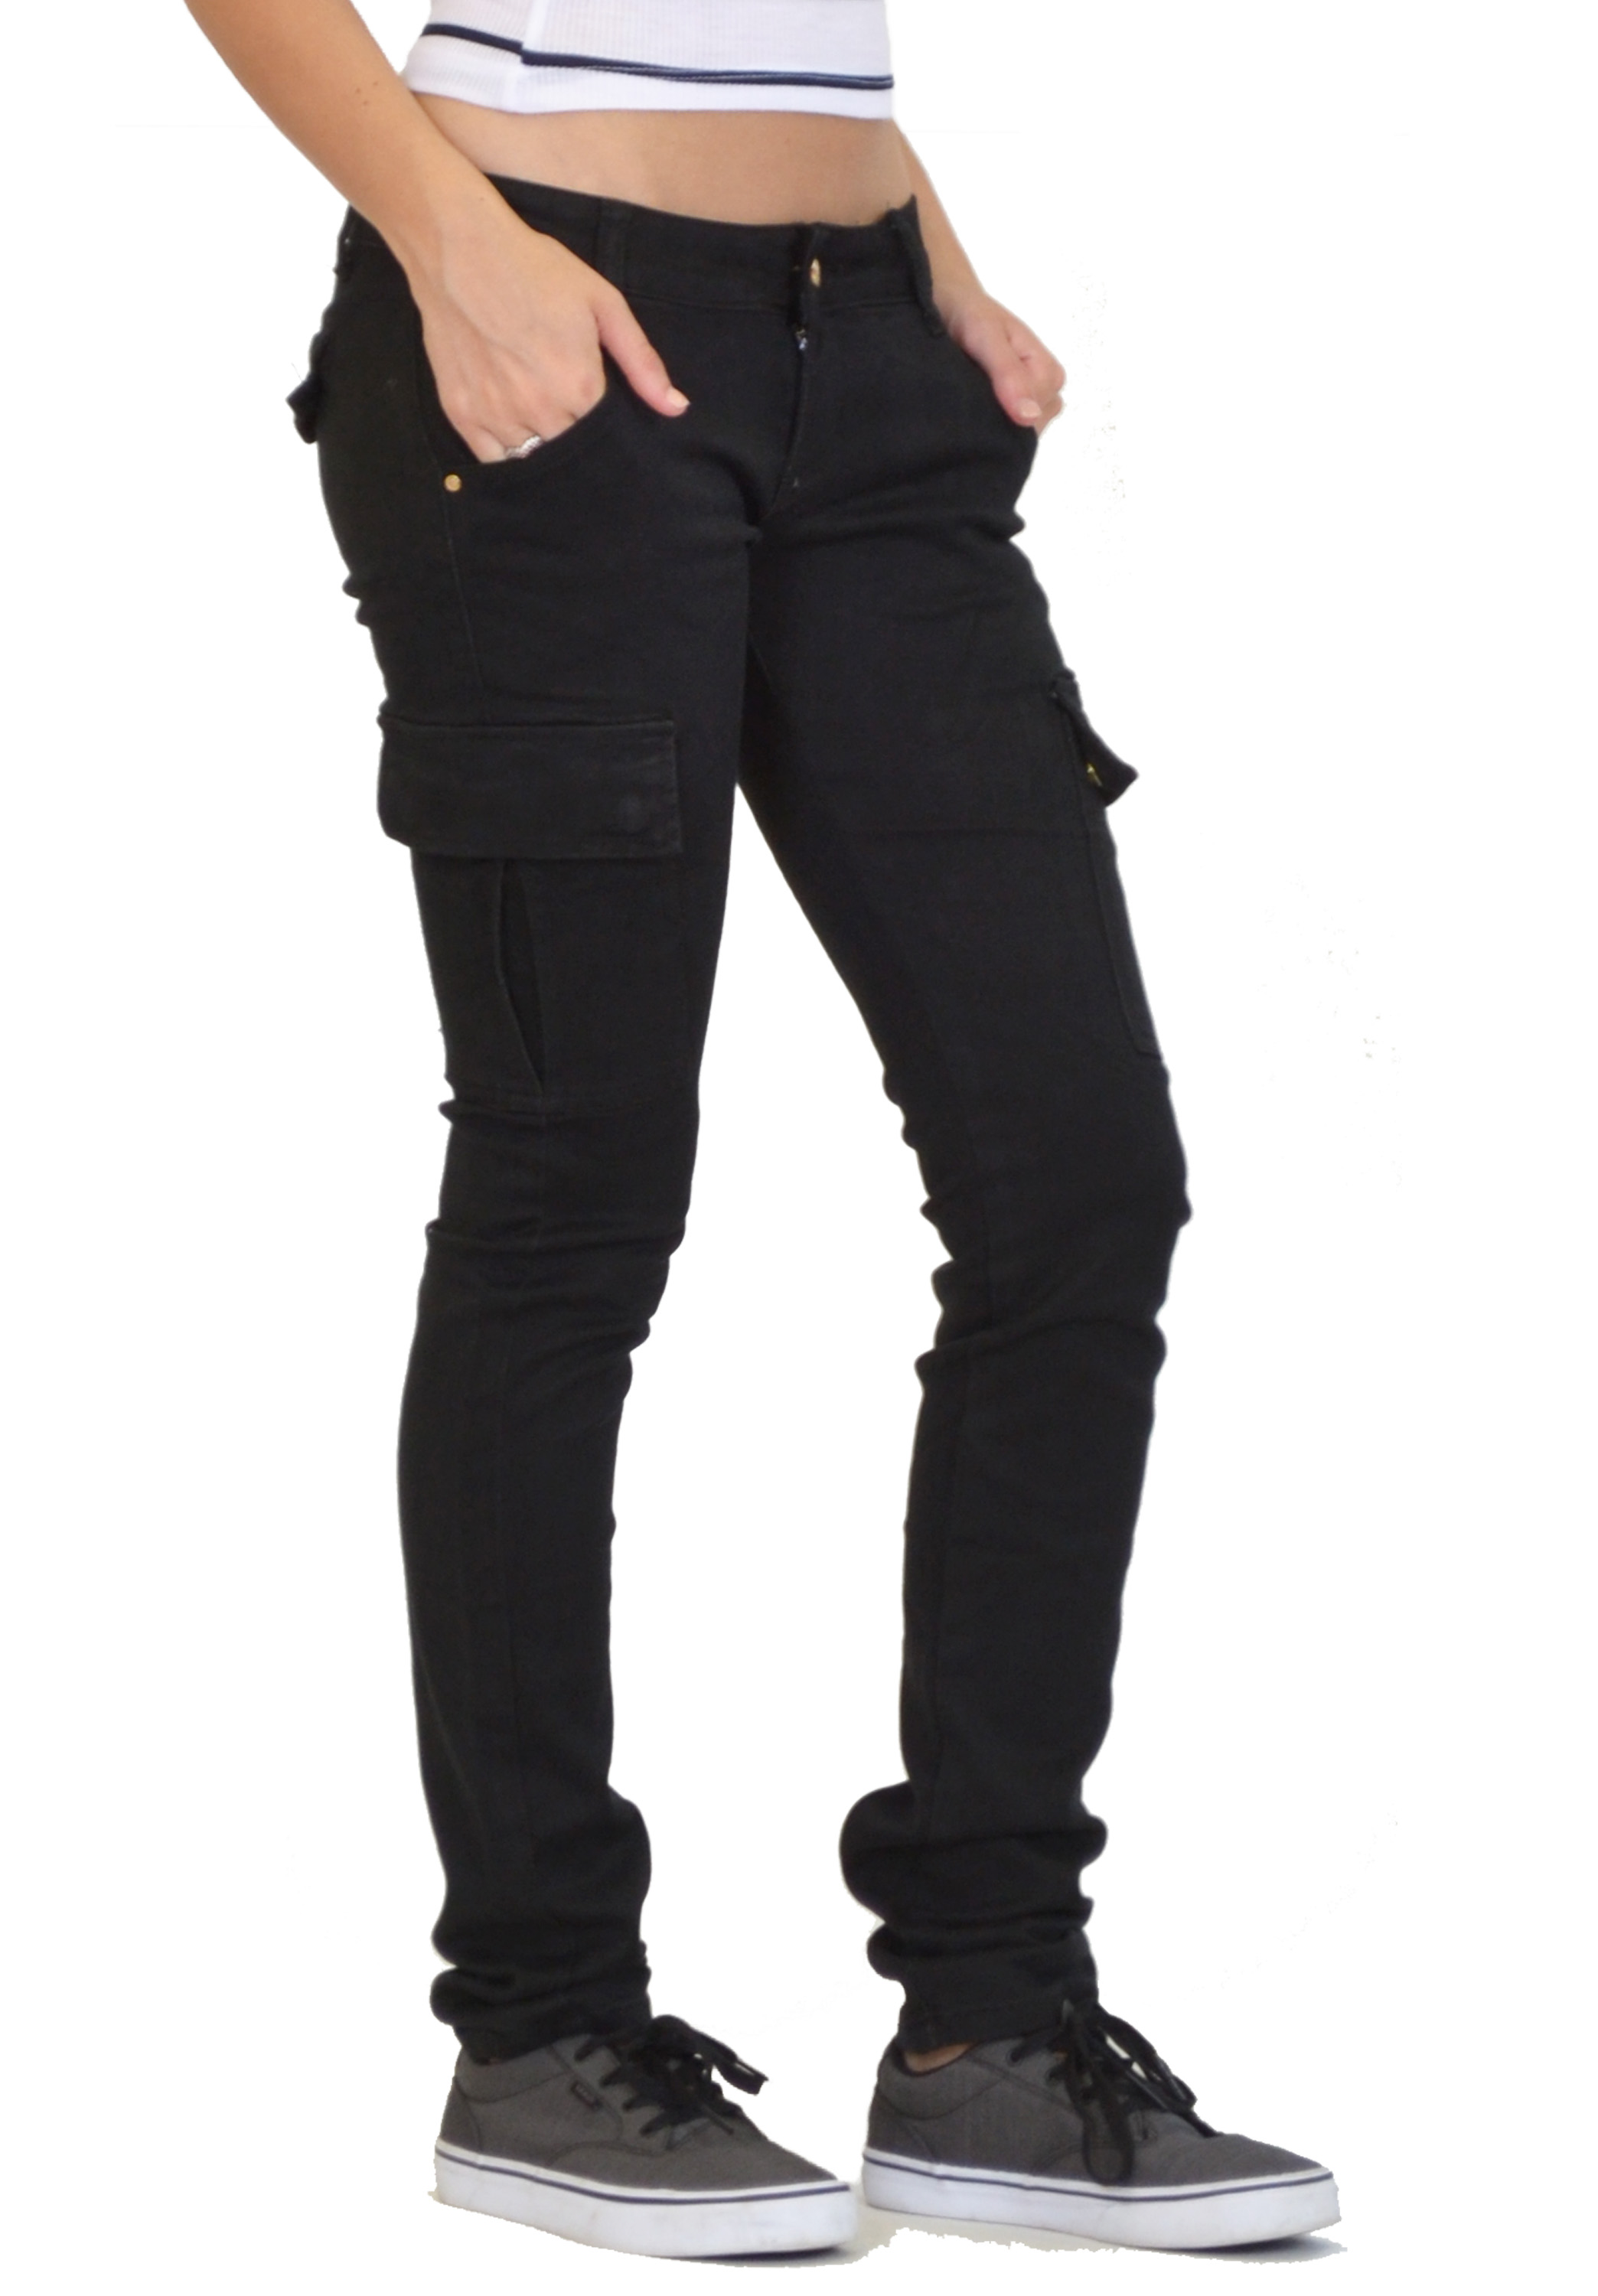 New Womens Ladies Slim Fitted Stretch Combat Jeans Pants Skinny Cargo ...